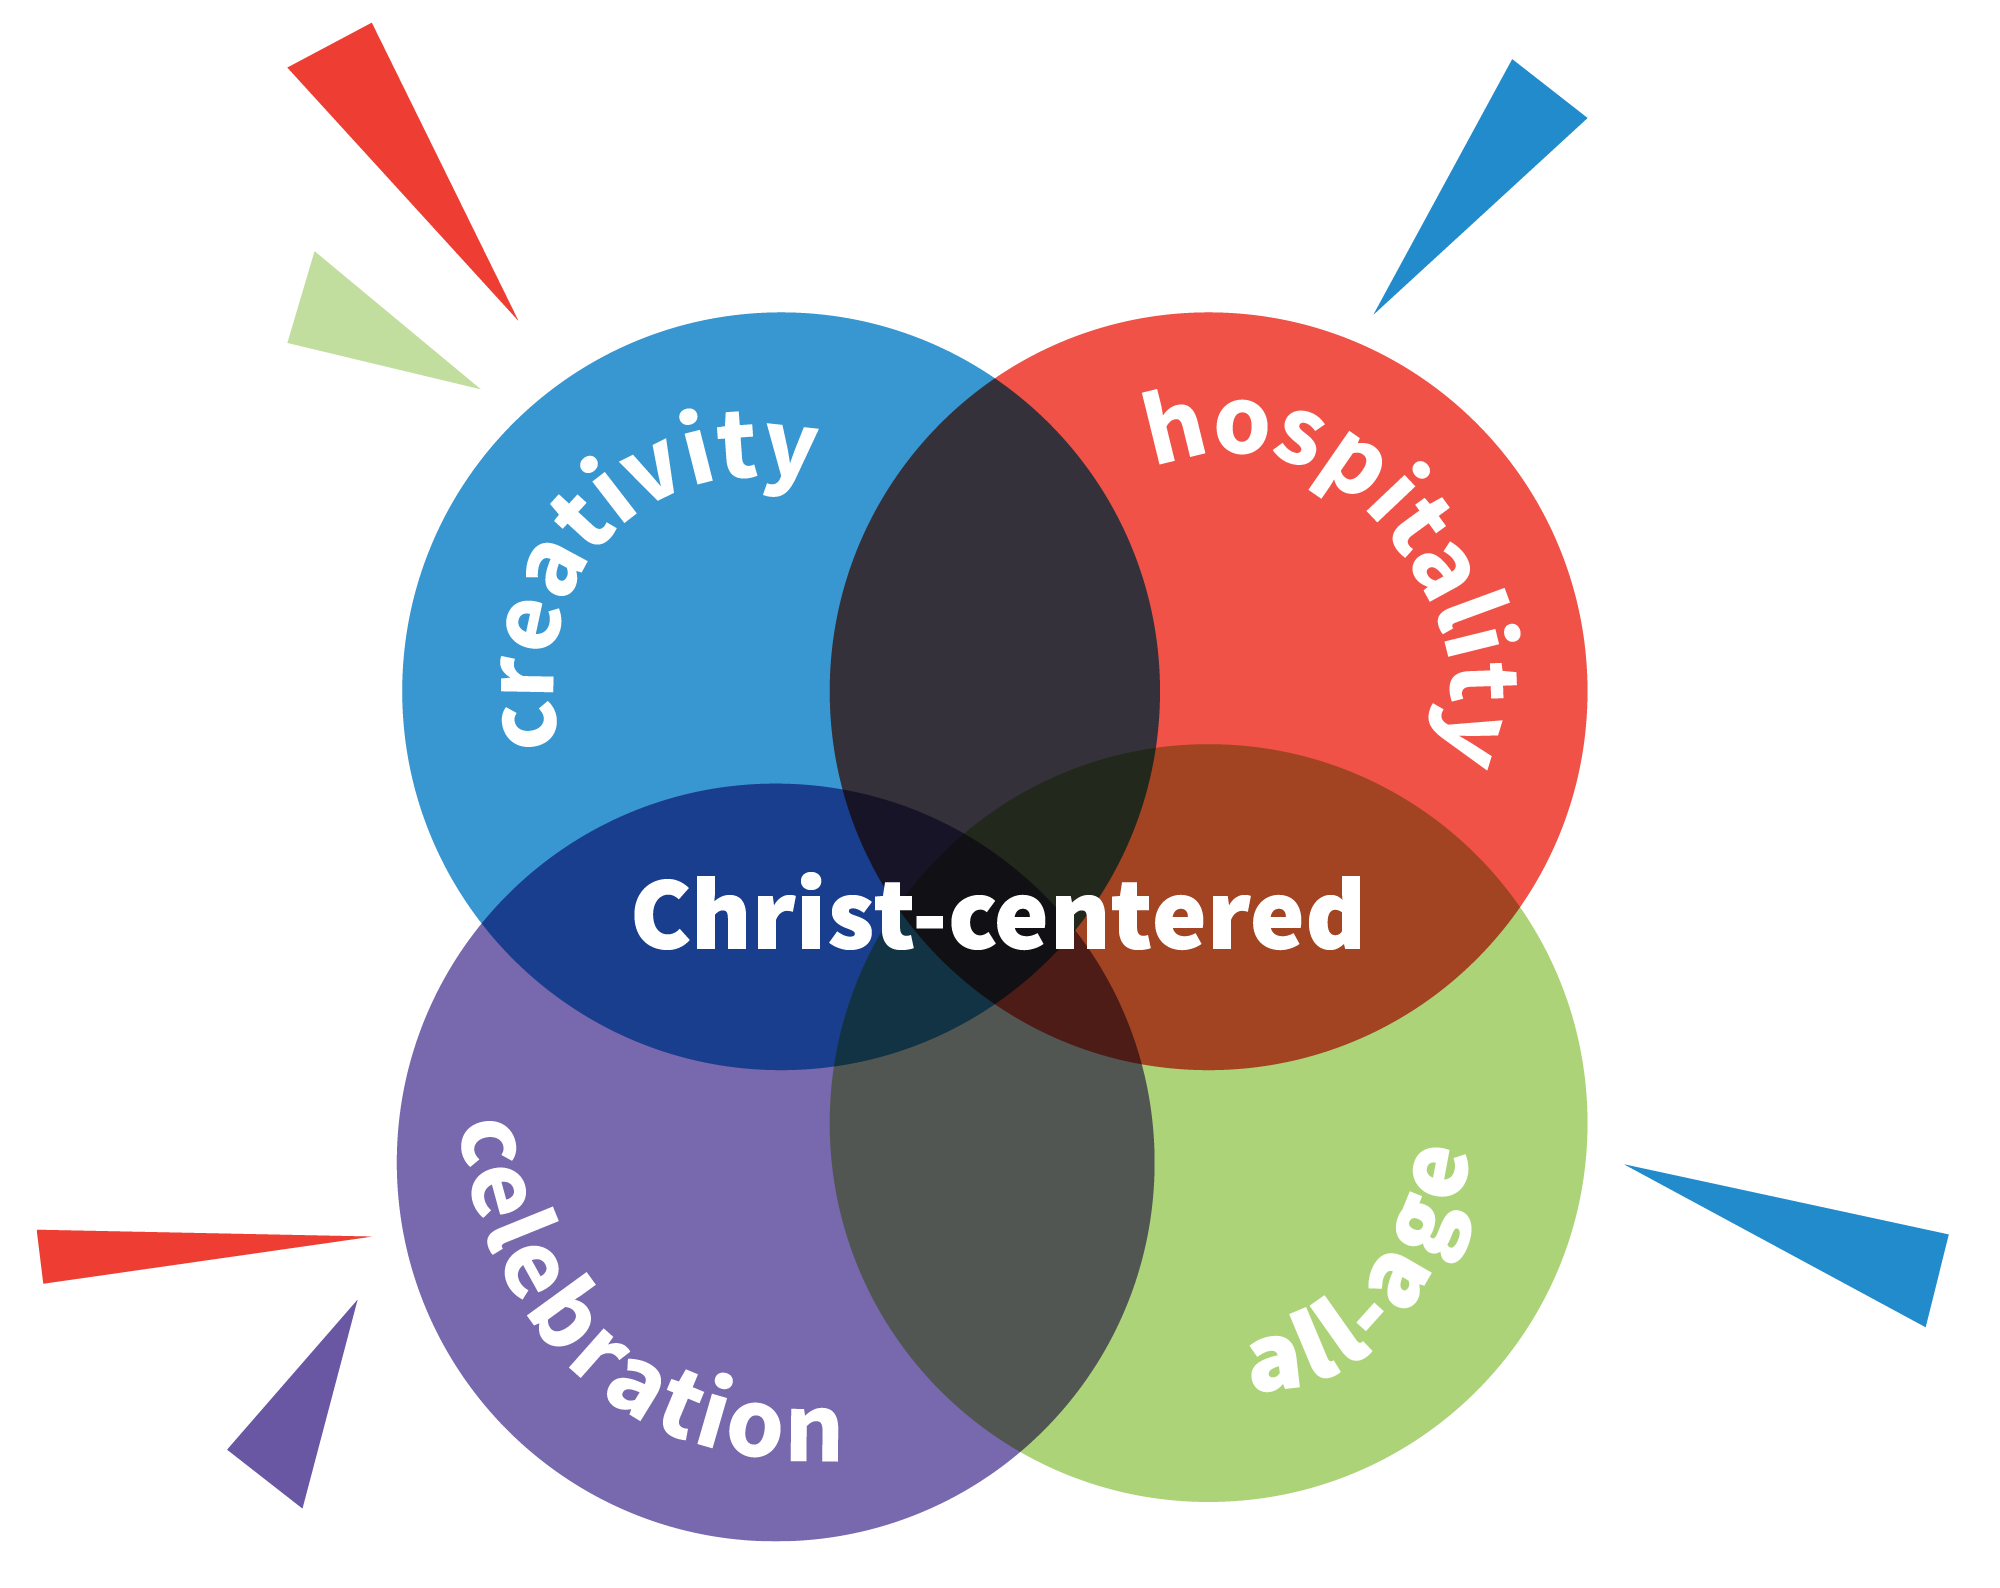 Five Values of Messy Church